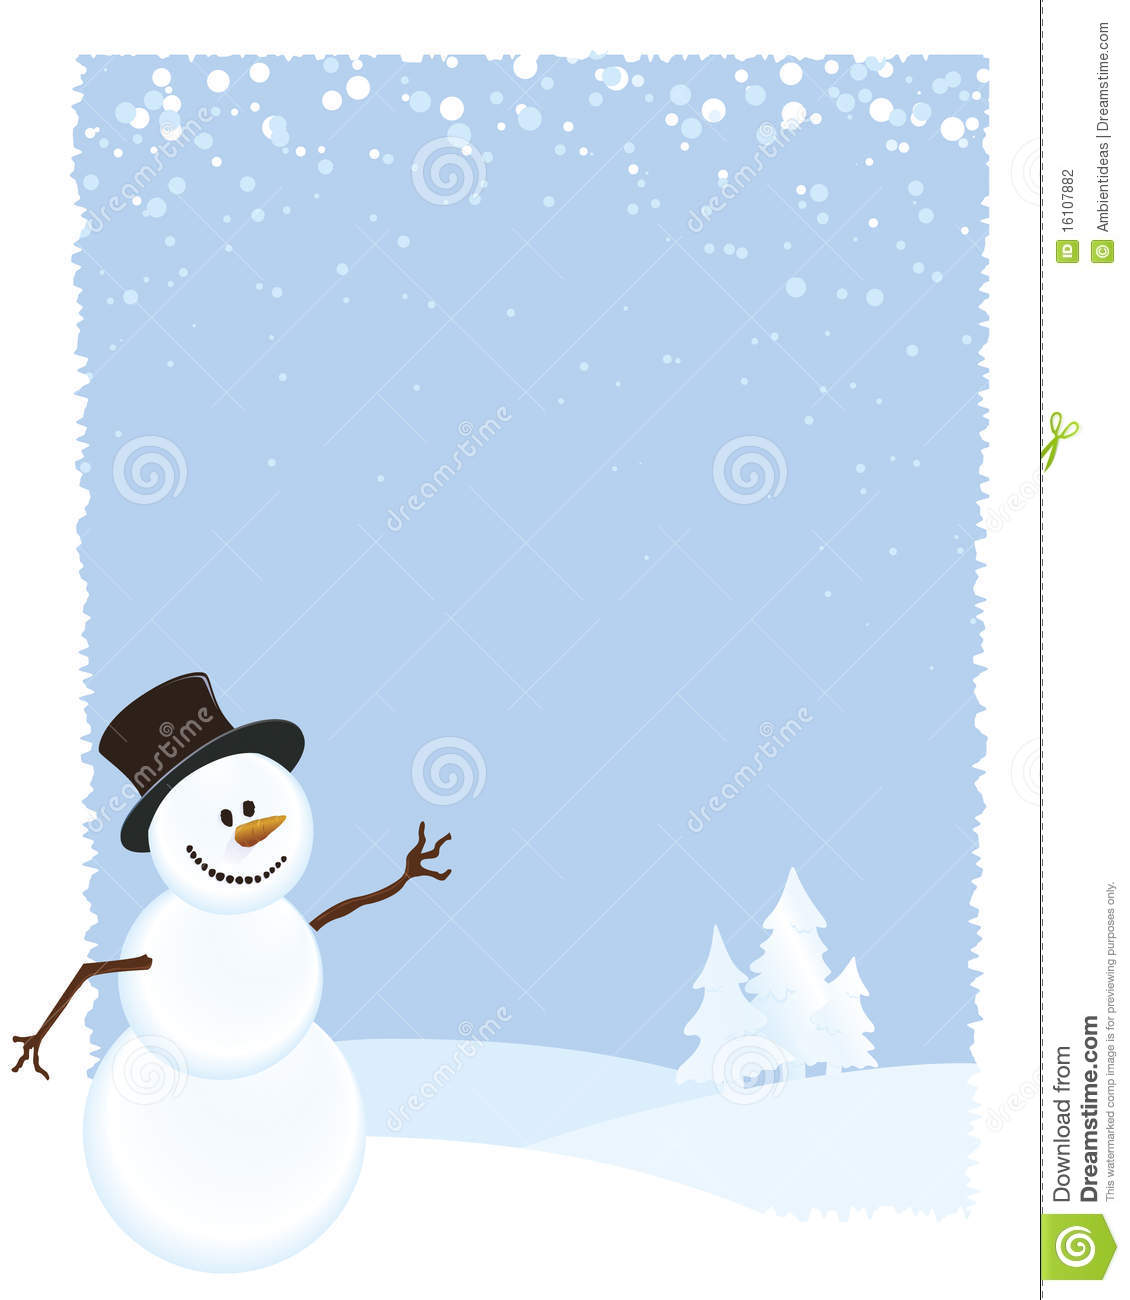 Snowman On Blue Winter Scene Background With Shaded Snow Covered Trees